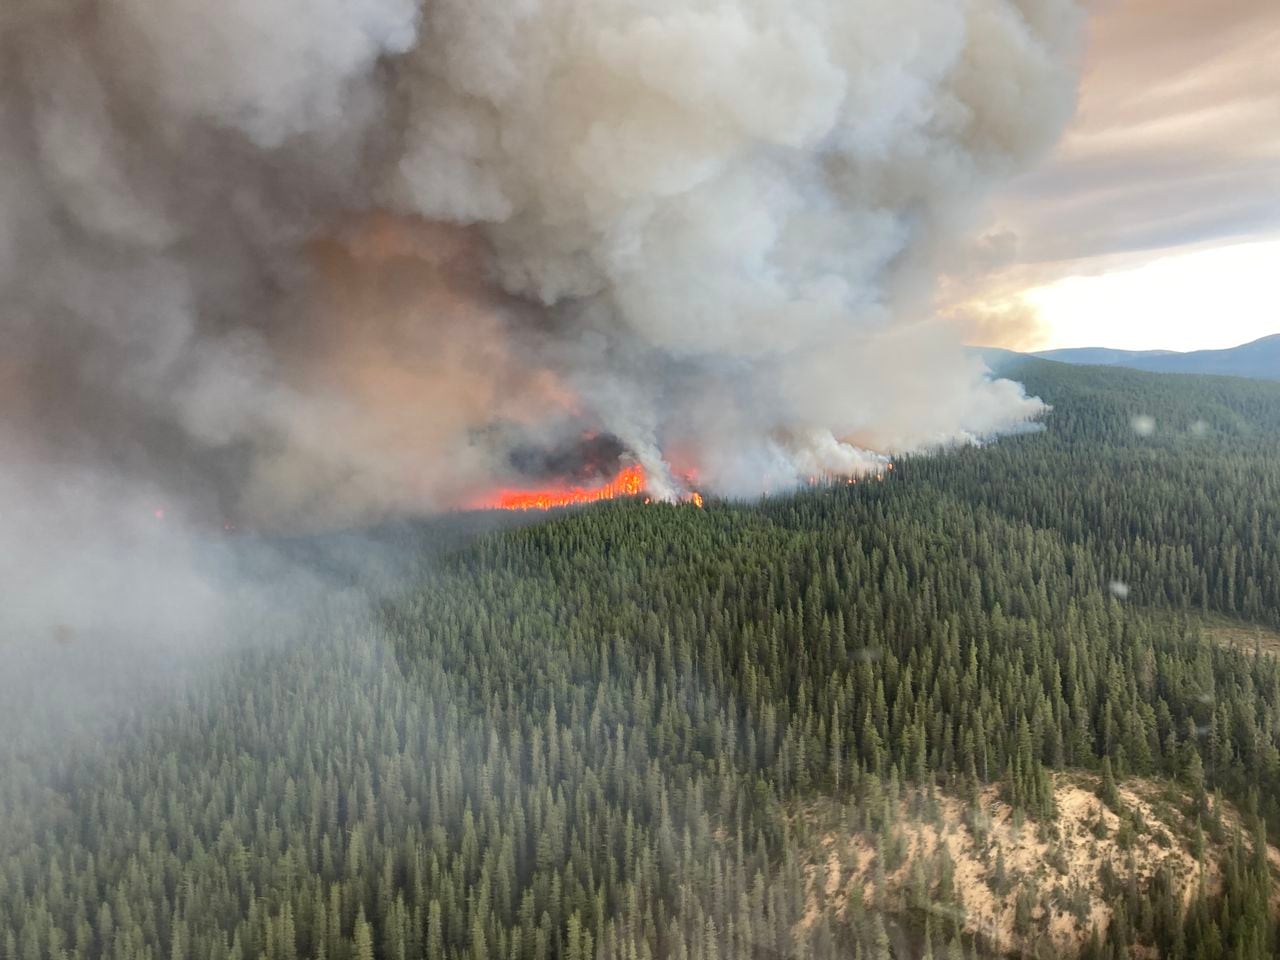 This undated handout photo provided by the British Columbia Wildfire Service on July 10, 2023, shows an aerial view of the Little Blue River wildfire, located approximately 40km (24.85 miles) south of Yukon, Canada. The number of forest fires continues to rise in Canada, climbing on July 7, 2023, to more than 670 blazes -- more than 380 of them out of control -- with a long and difficult summer ahead. With nine million hectares (22.2 million acres) already gone up in smoke -- 11 times the average for the last decade -- the absolute annual record set in 1989 has been surpassed. (Photo by BC Wildfire Service / AFP) / RESTRICTED TO EDITORIAL USE - MANDATORY CREDIT "AFP PHOTO / BC Wildfire Service / Handout" - NO MARKETING NO ADVERTISING CAMPAIGNS - DISTRIBUTED AS A SERVICE TO CLIENTS